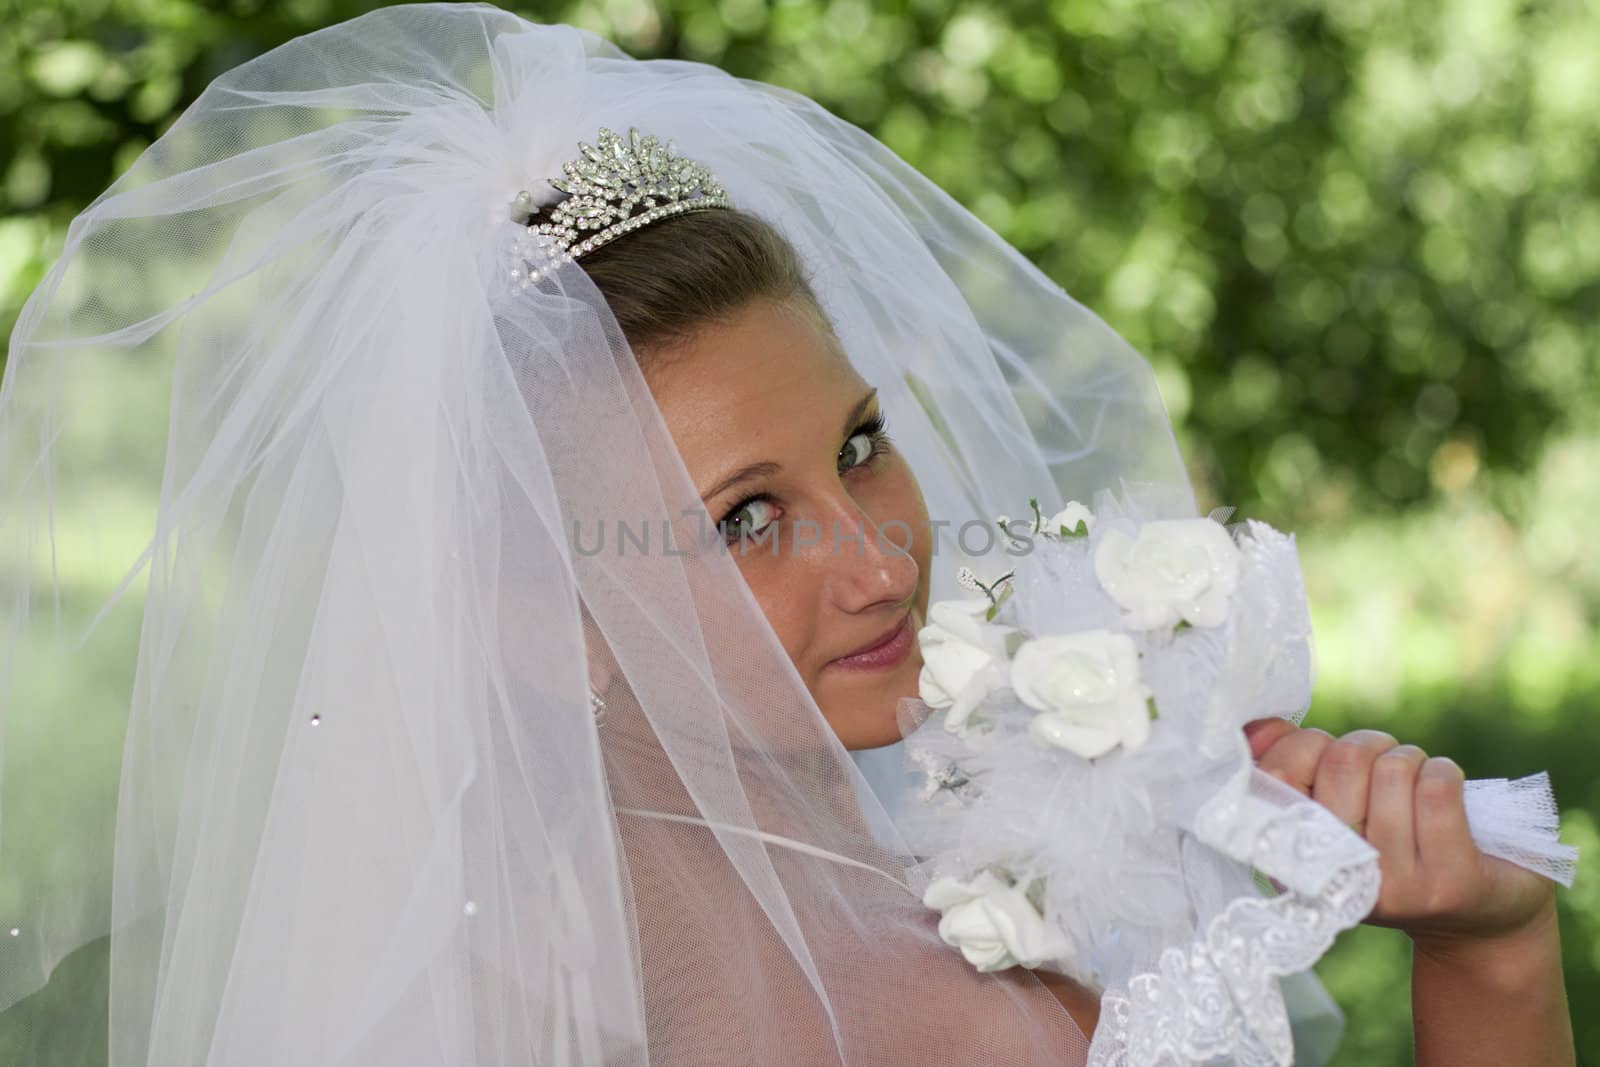 The bride with a bouquet of white flowers